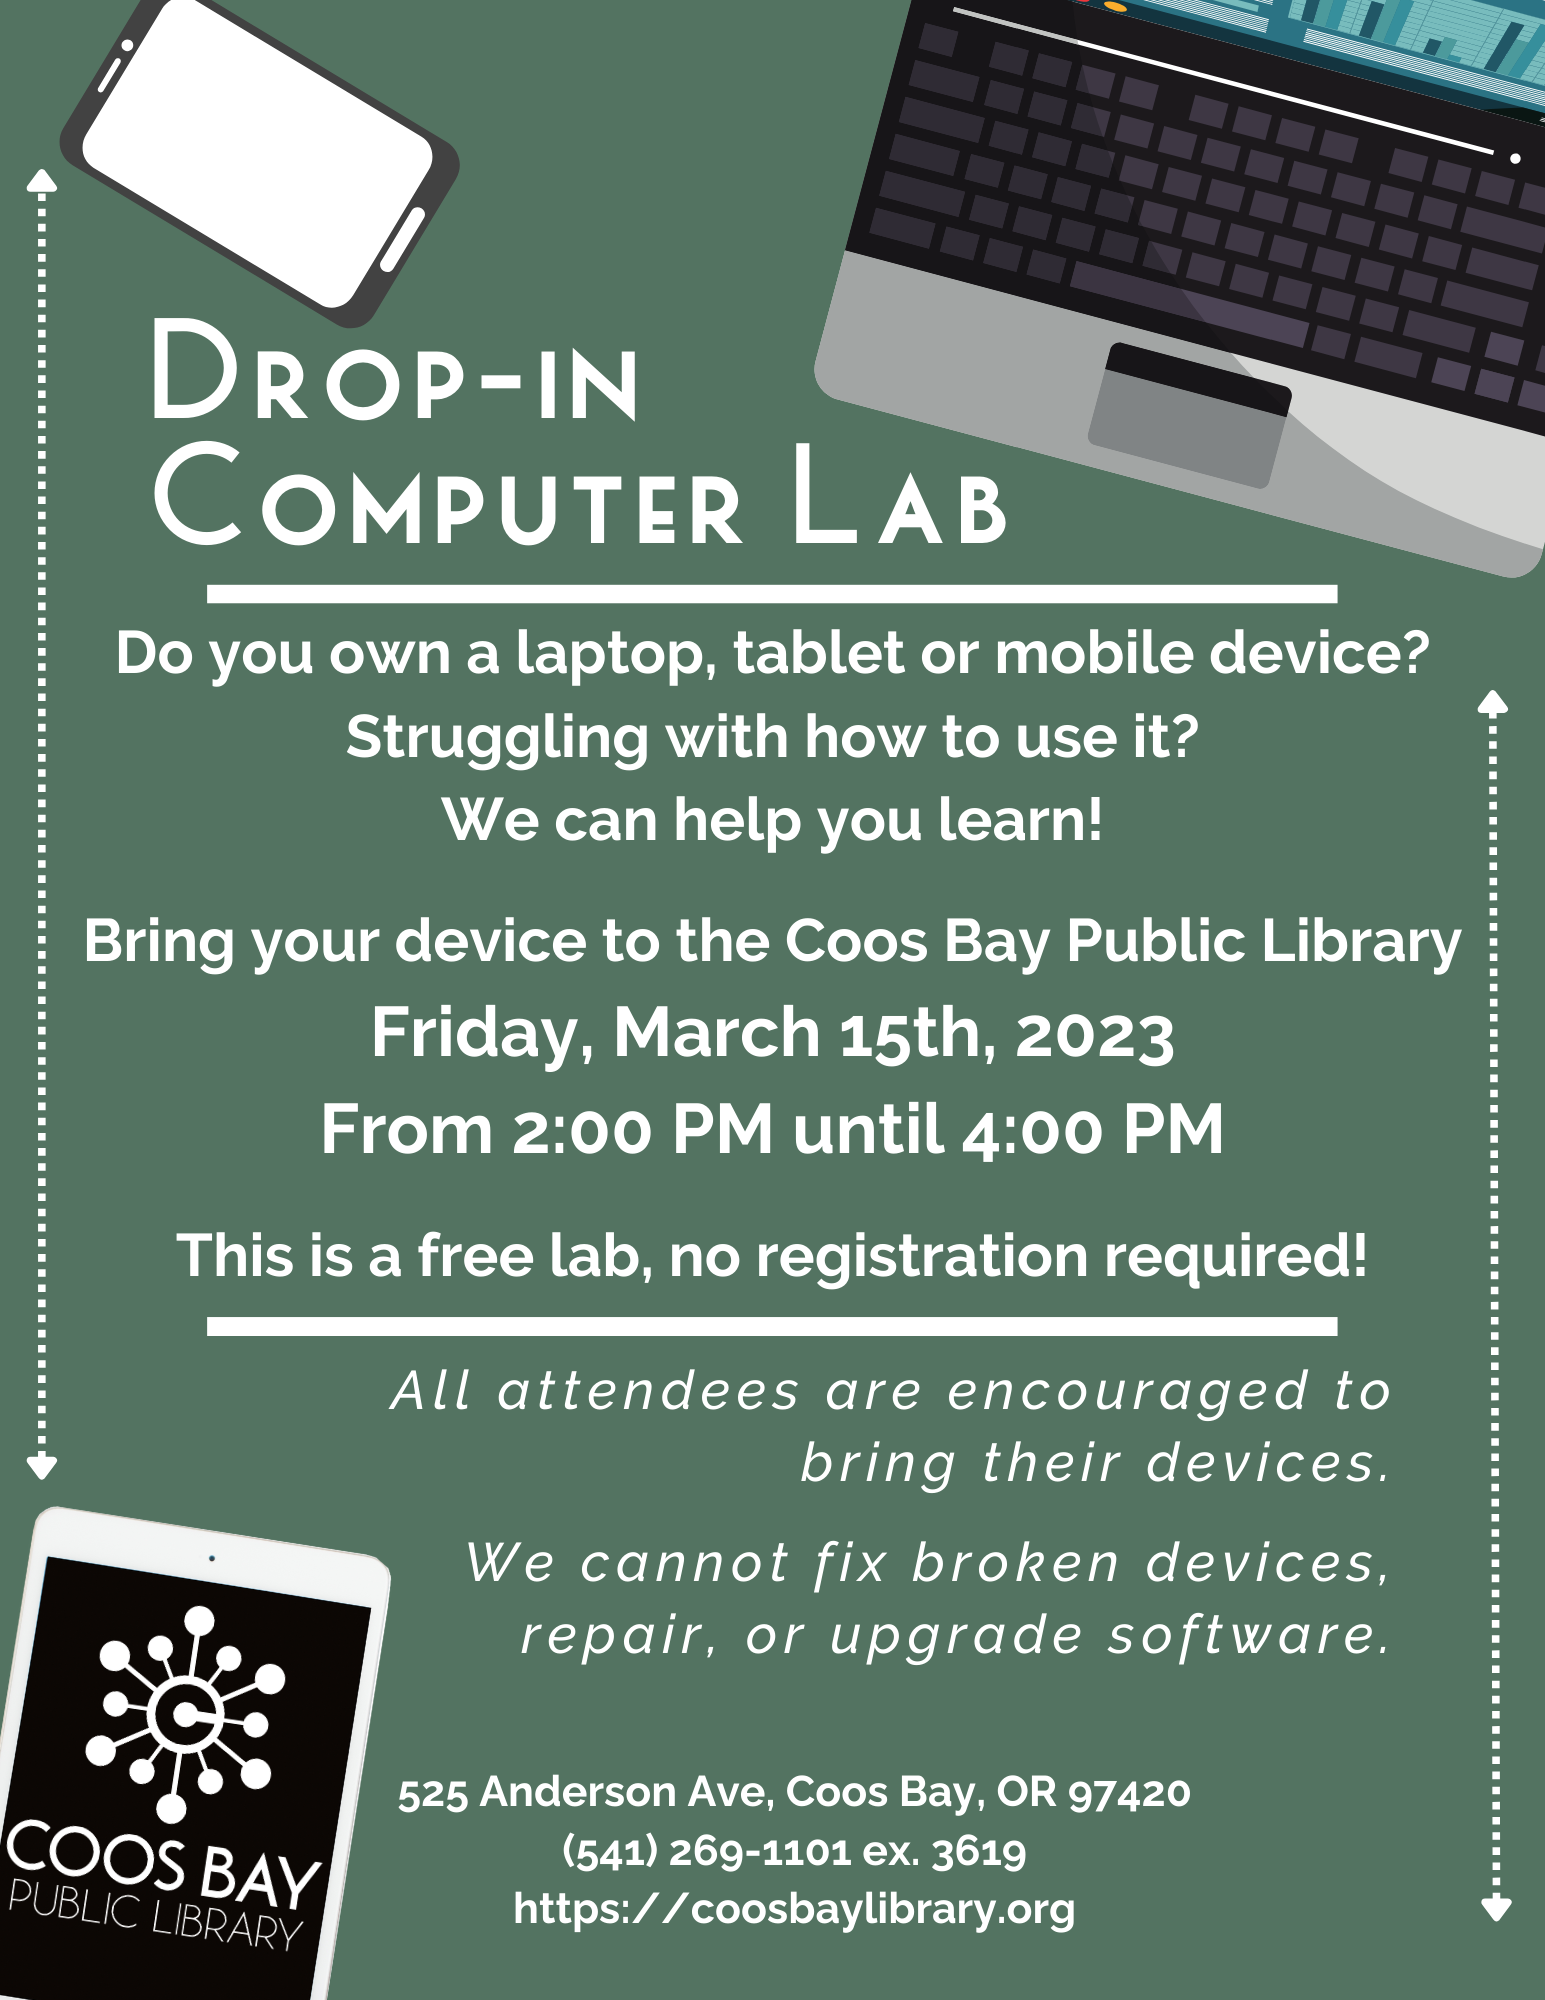 Drop-in Tech lab flyer for March 15, 2 to 4 pm